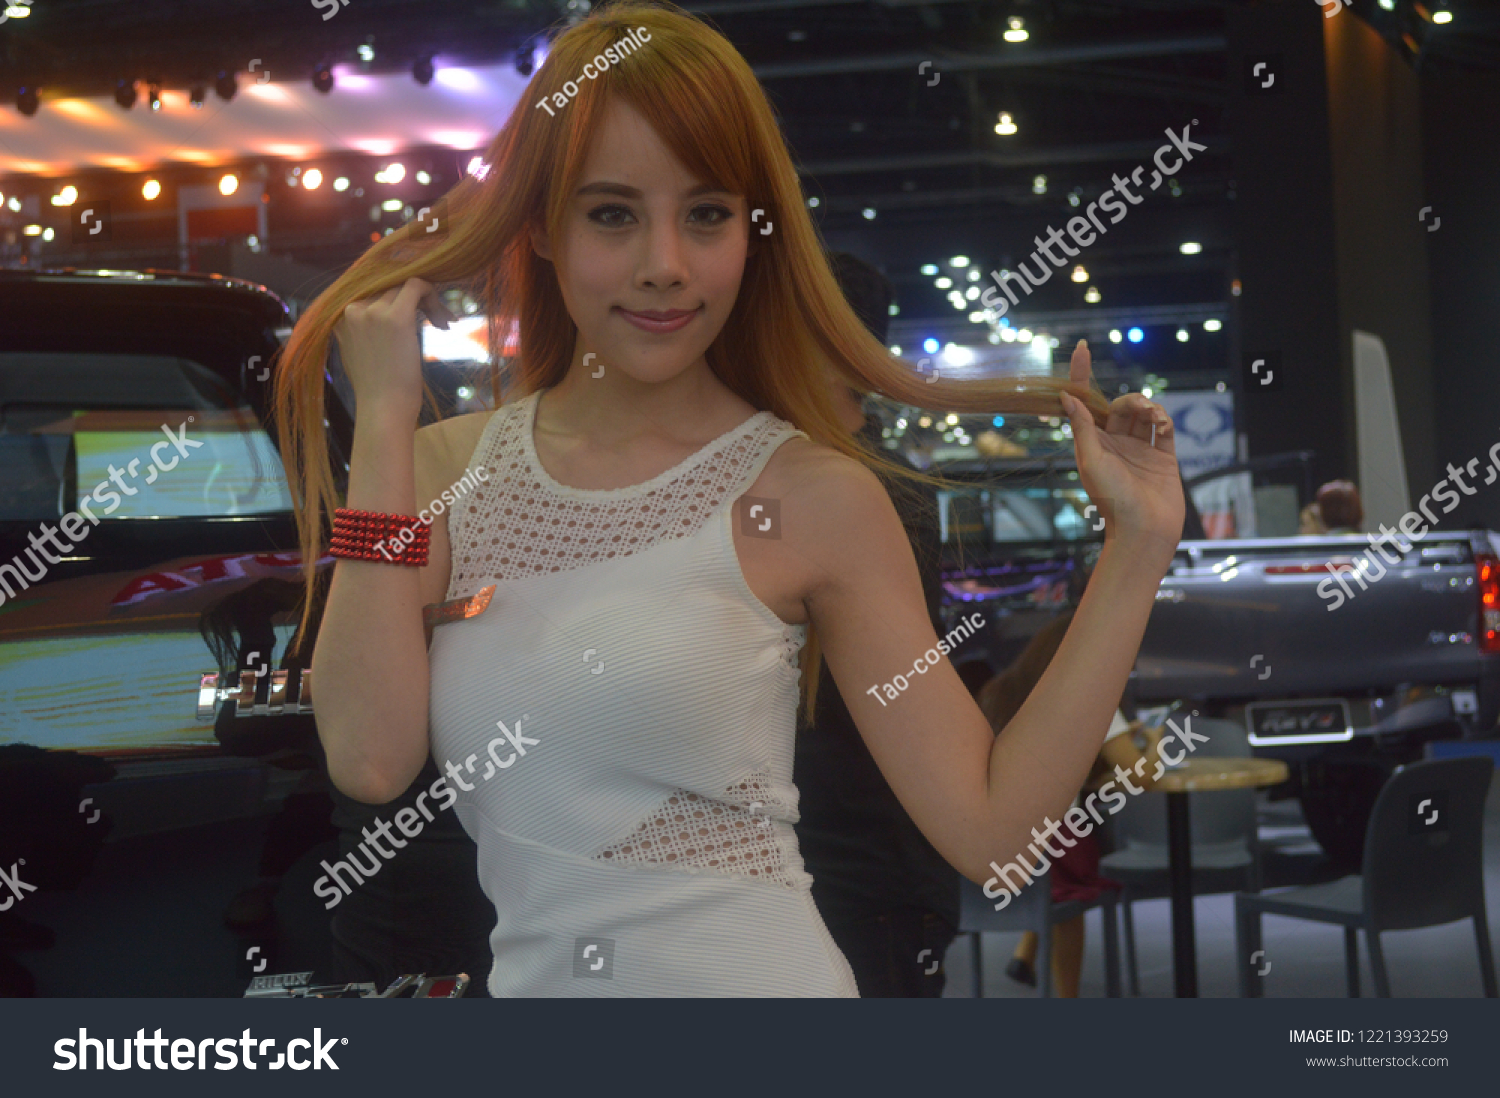 Sexy Girls At Carshows